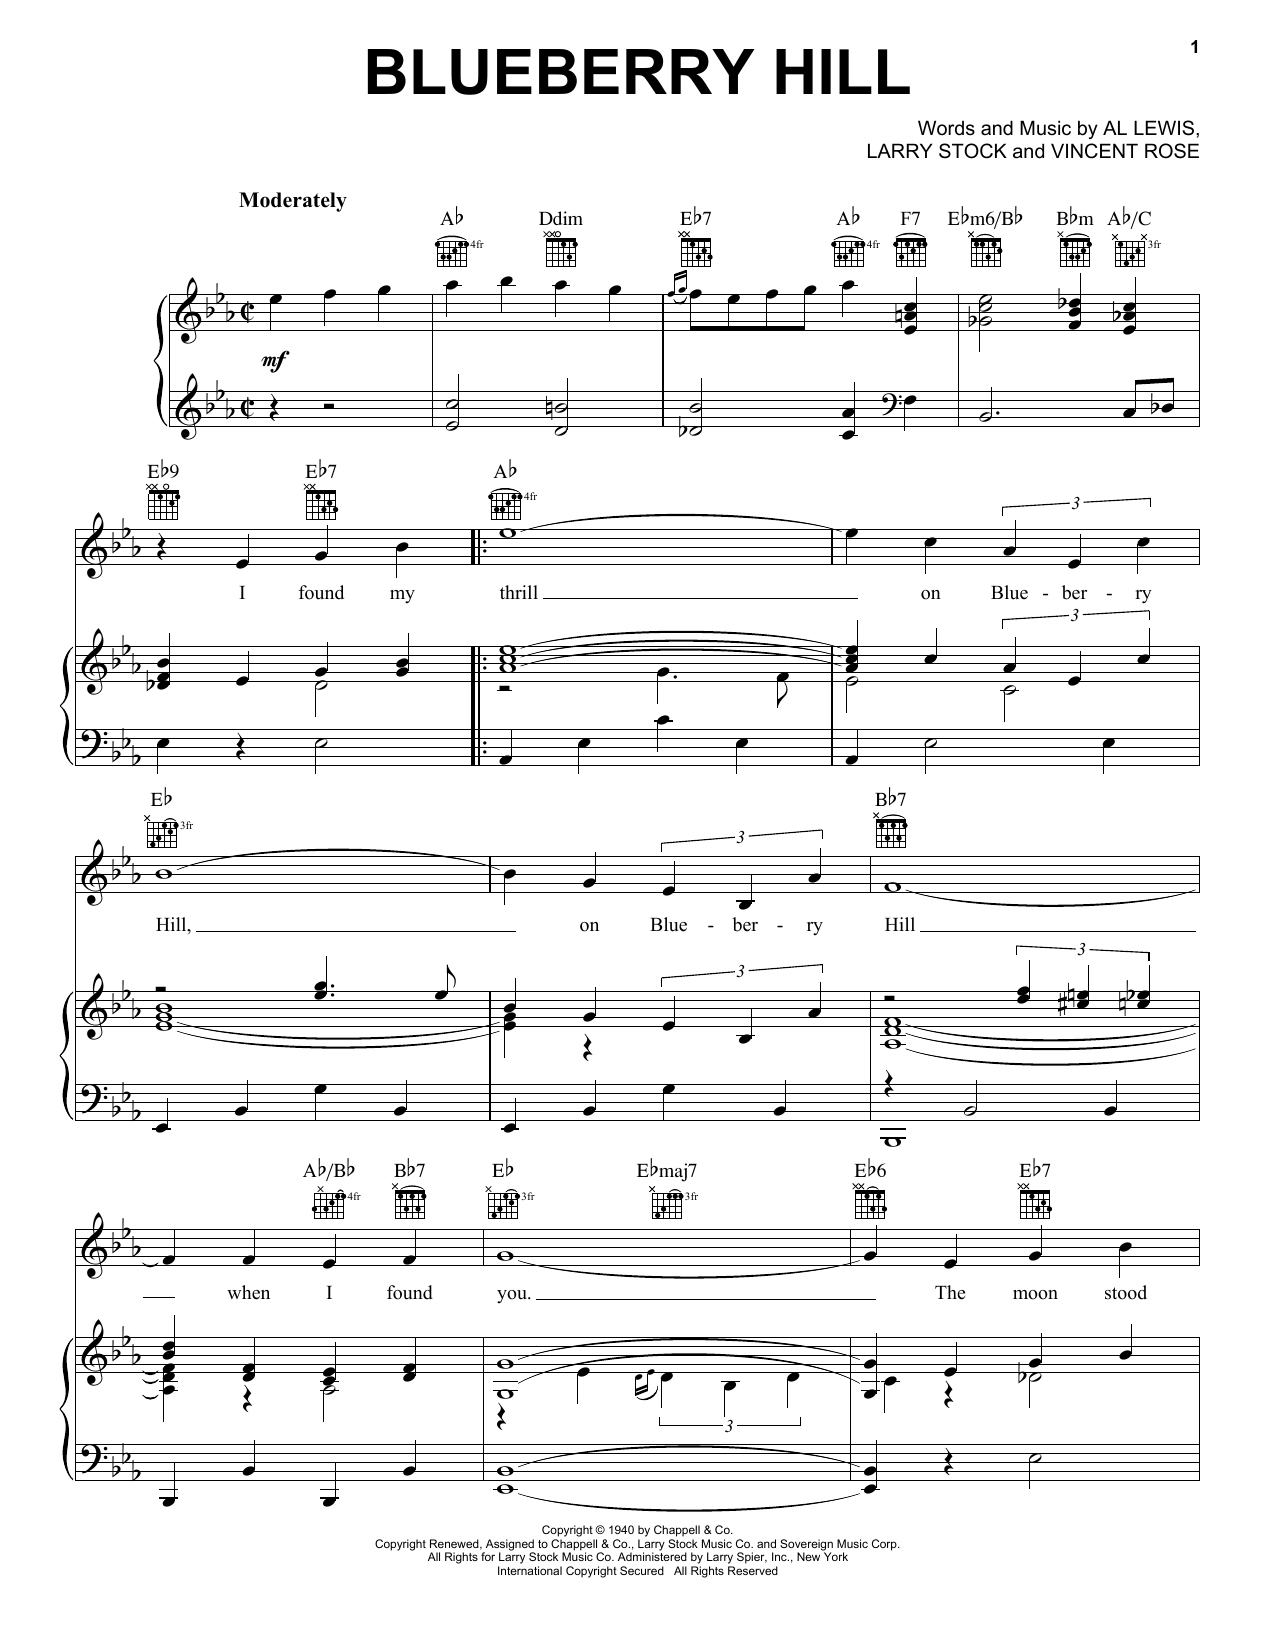 Fats Domino Blueberry Hill sheet music notes printable PDF score